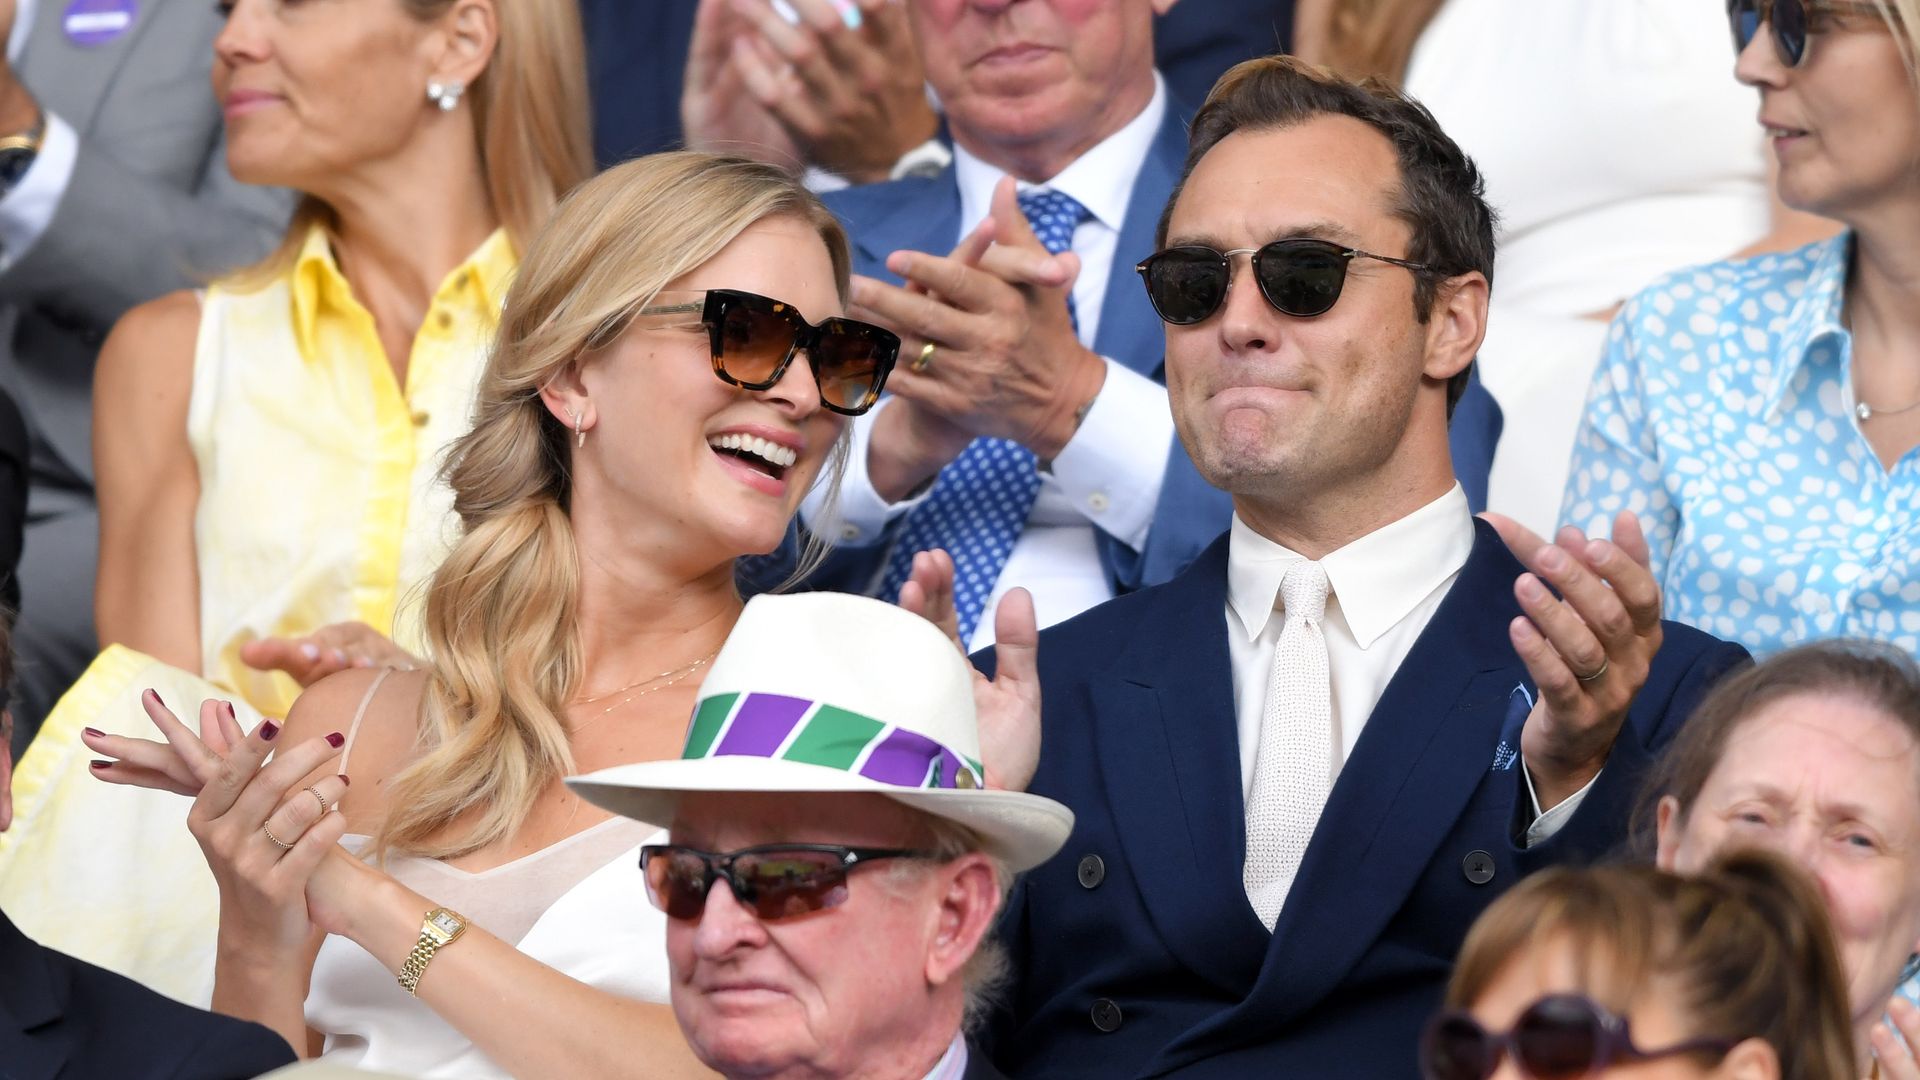 Jude and Phillipa sat watching Wimbledon, both are wearing sunglasses and clapping